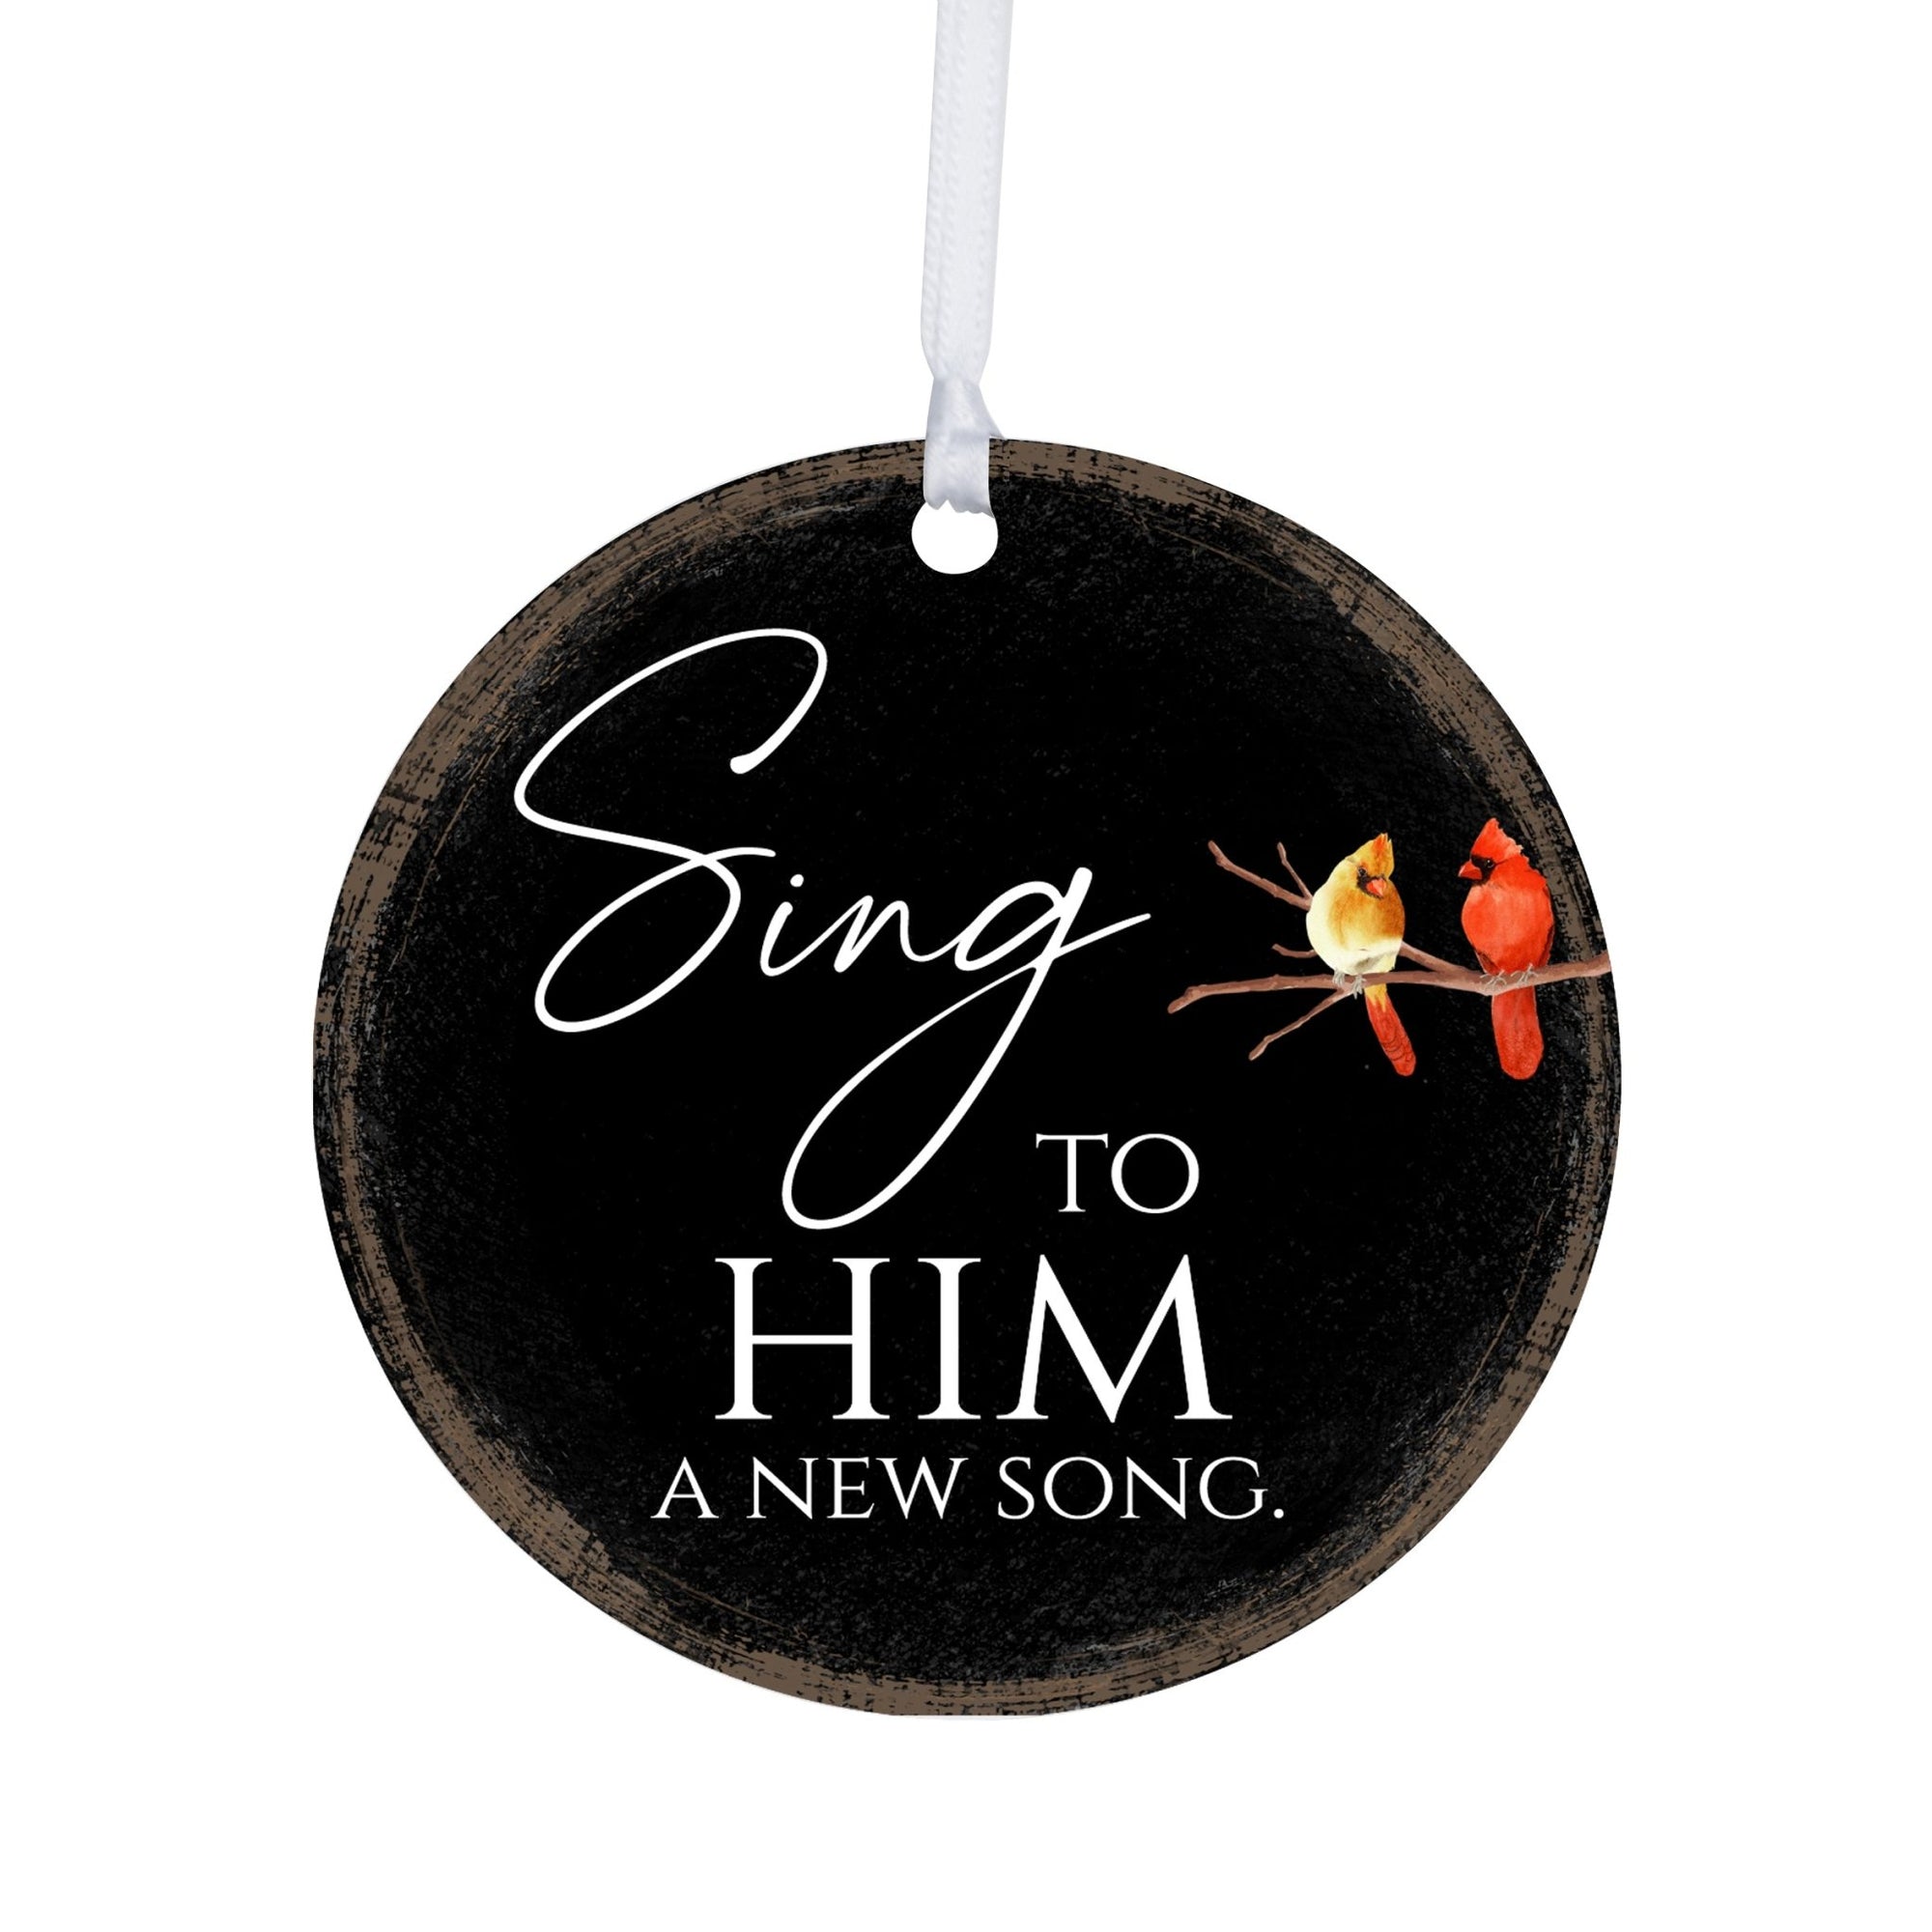 Vintage-Inspired Cardinal Ornament With Everyday Verses Gift Ideas - Sing To Him - LifeSong Milestones